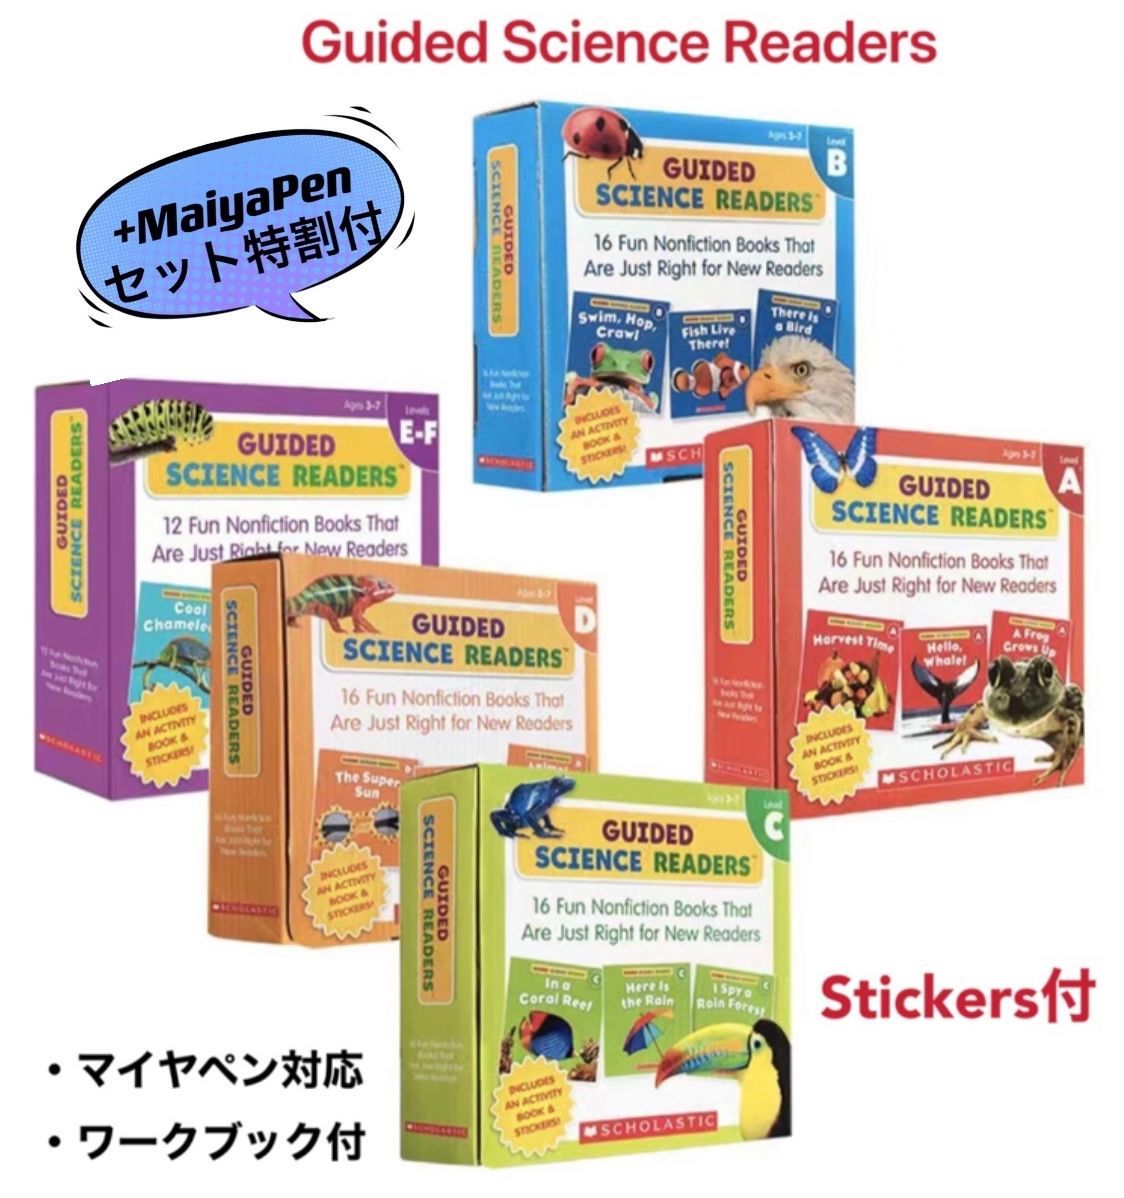 Guided Science Readers サイエンスリーダー マイヤペン対応